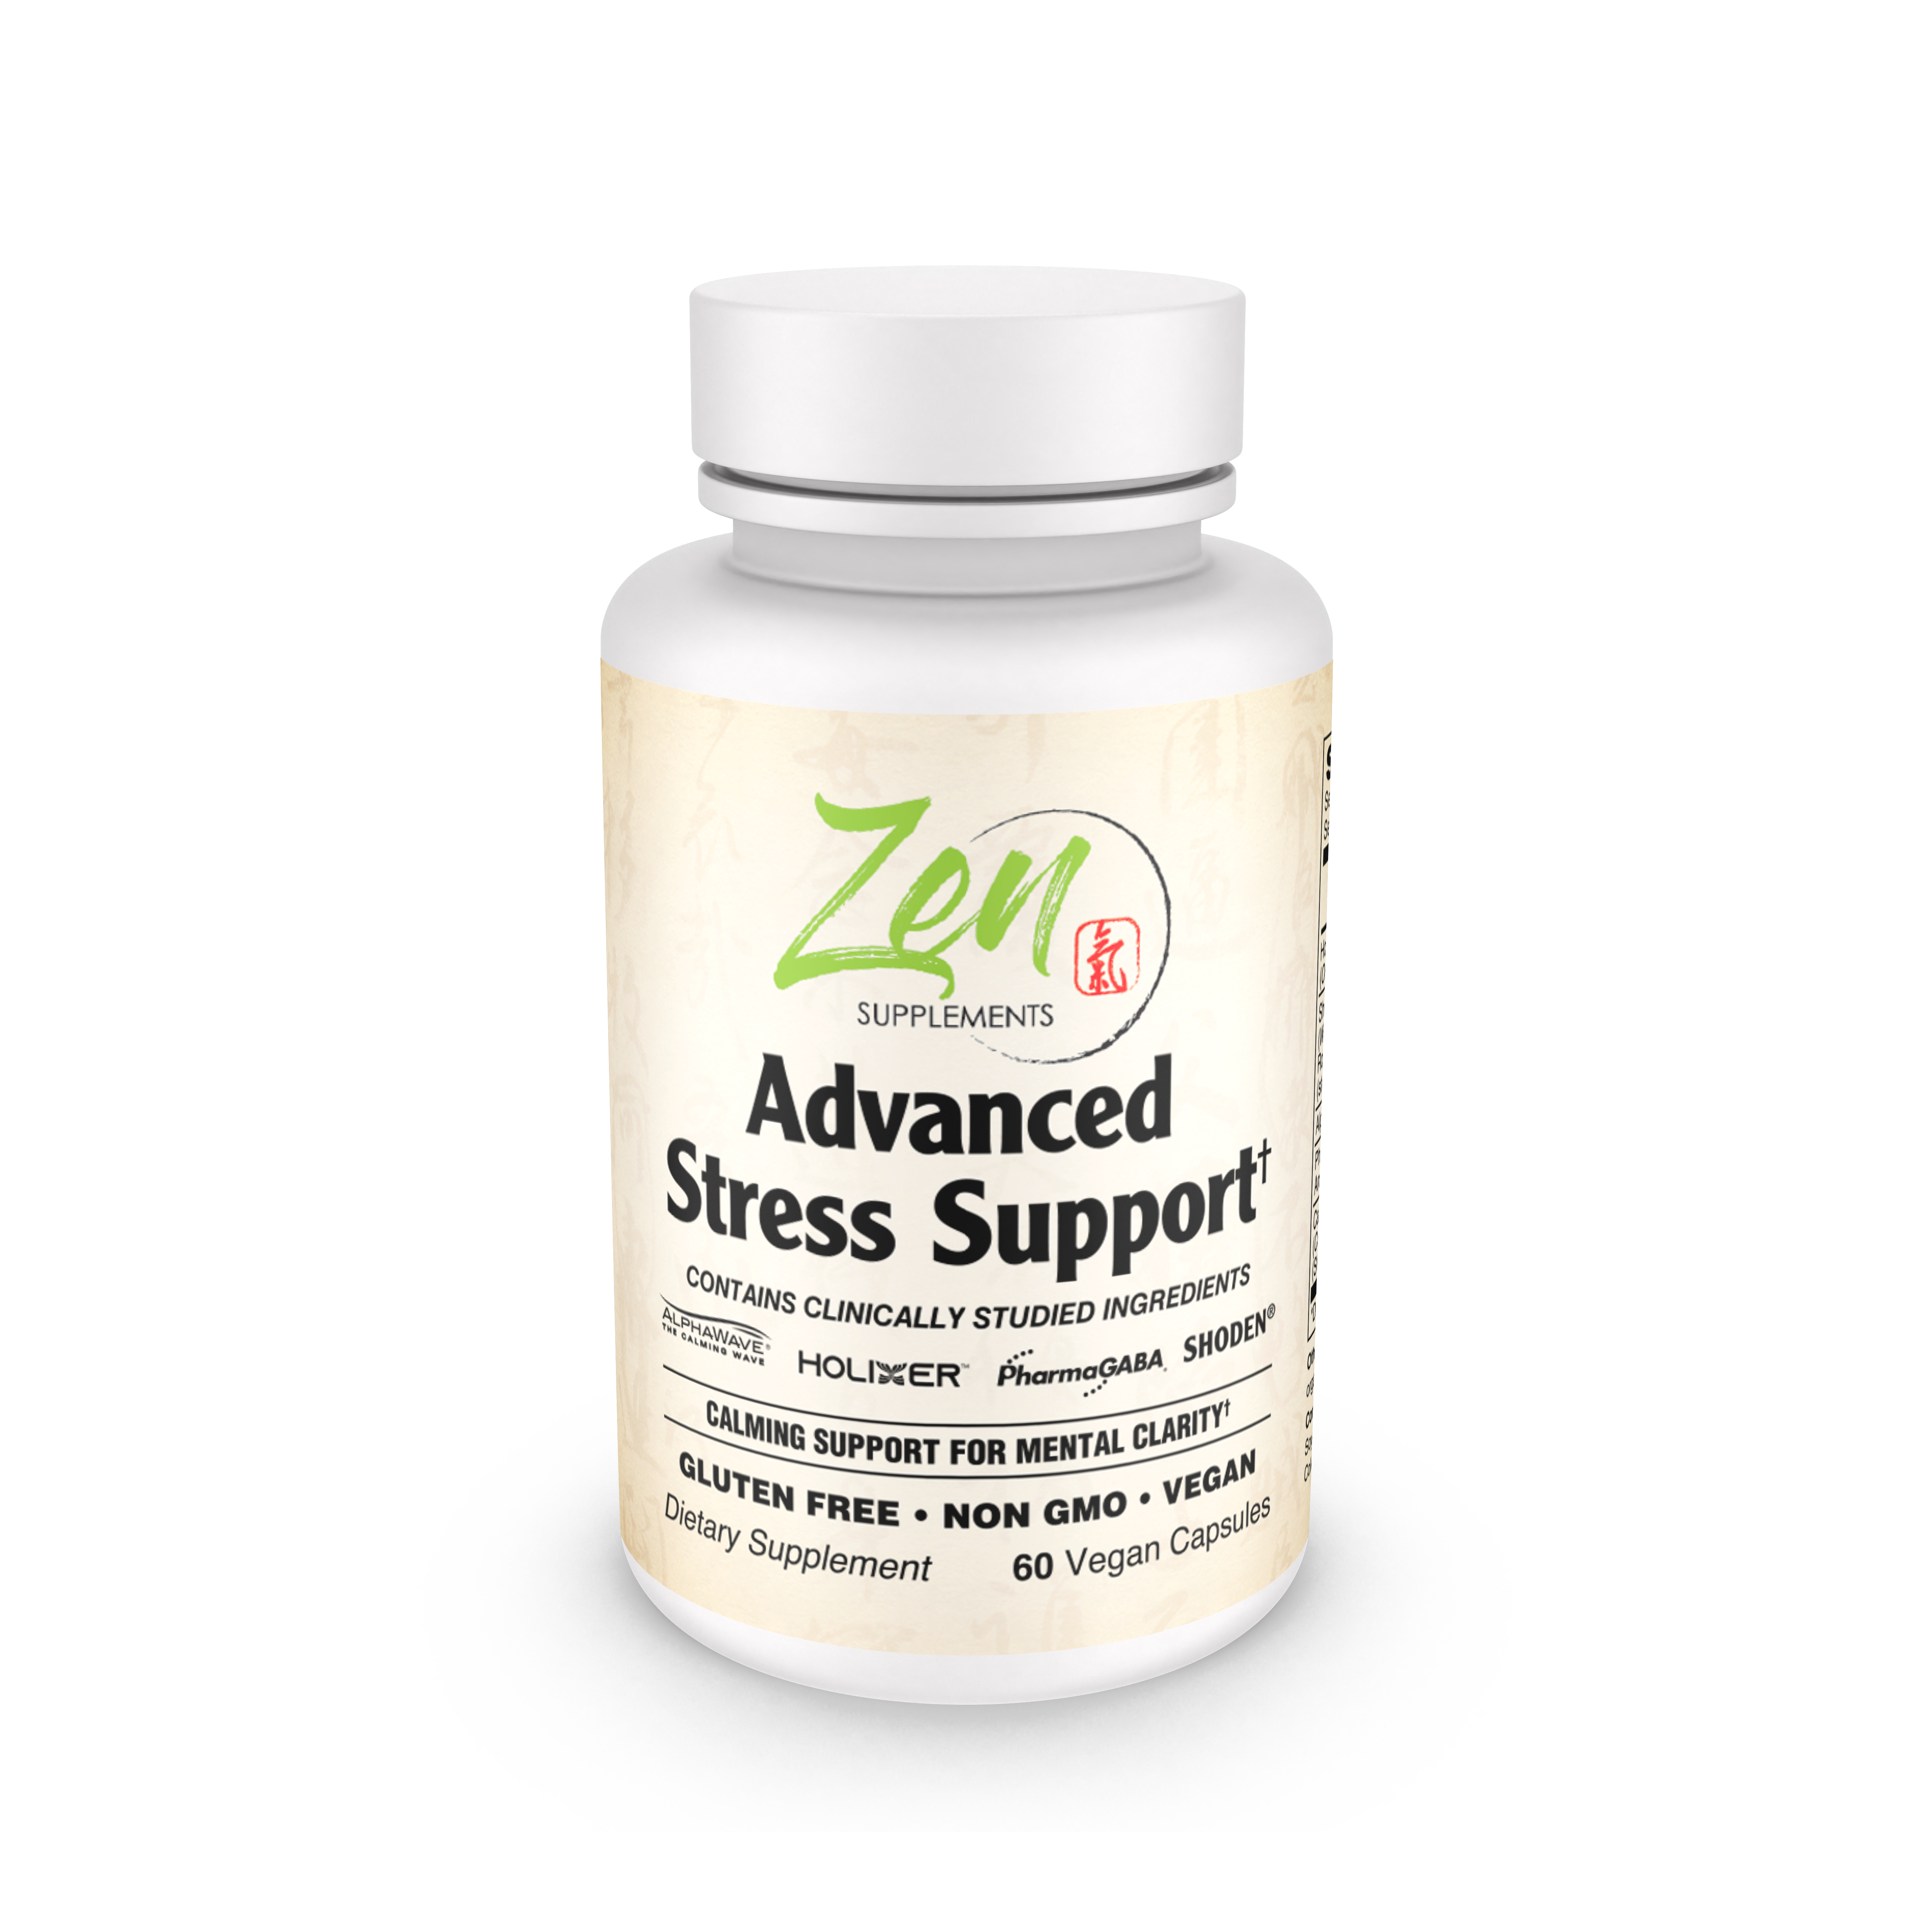 Advanced Stress Support Supplement - Cortisol Management 60VCaps